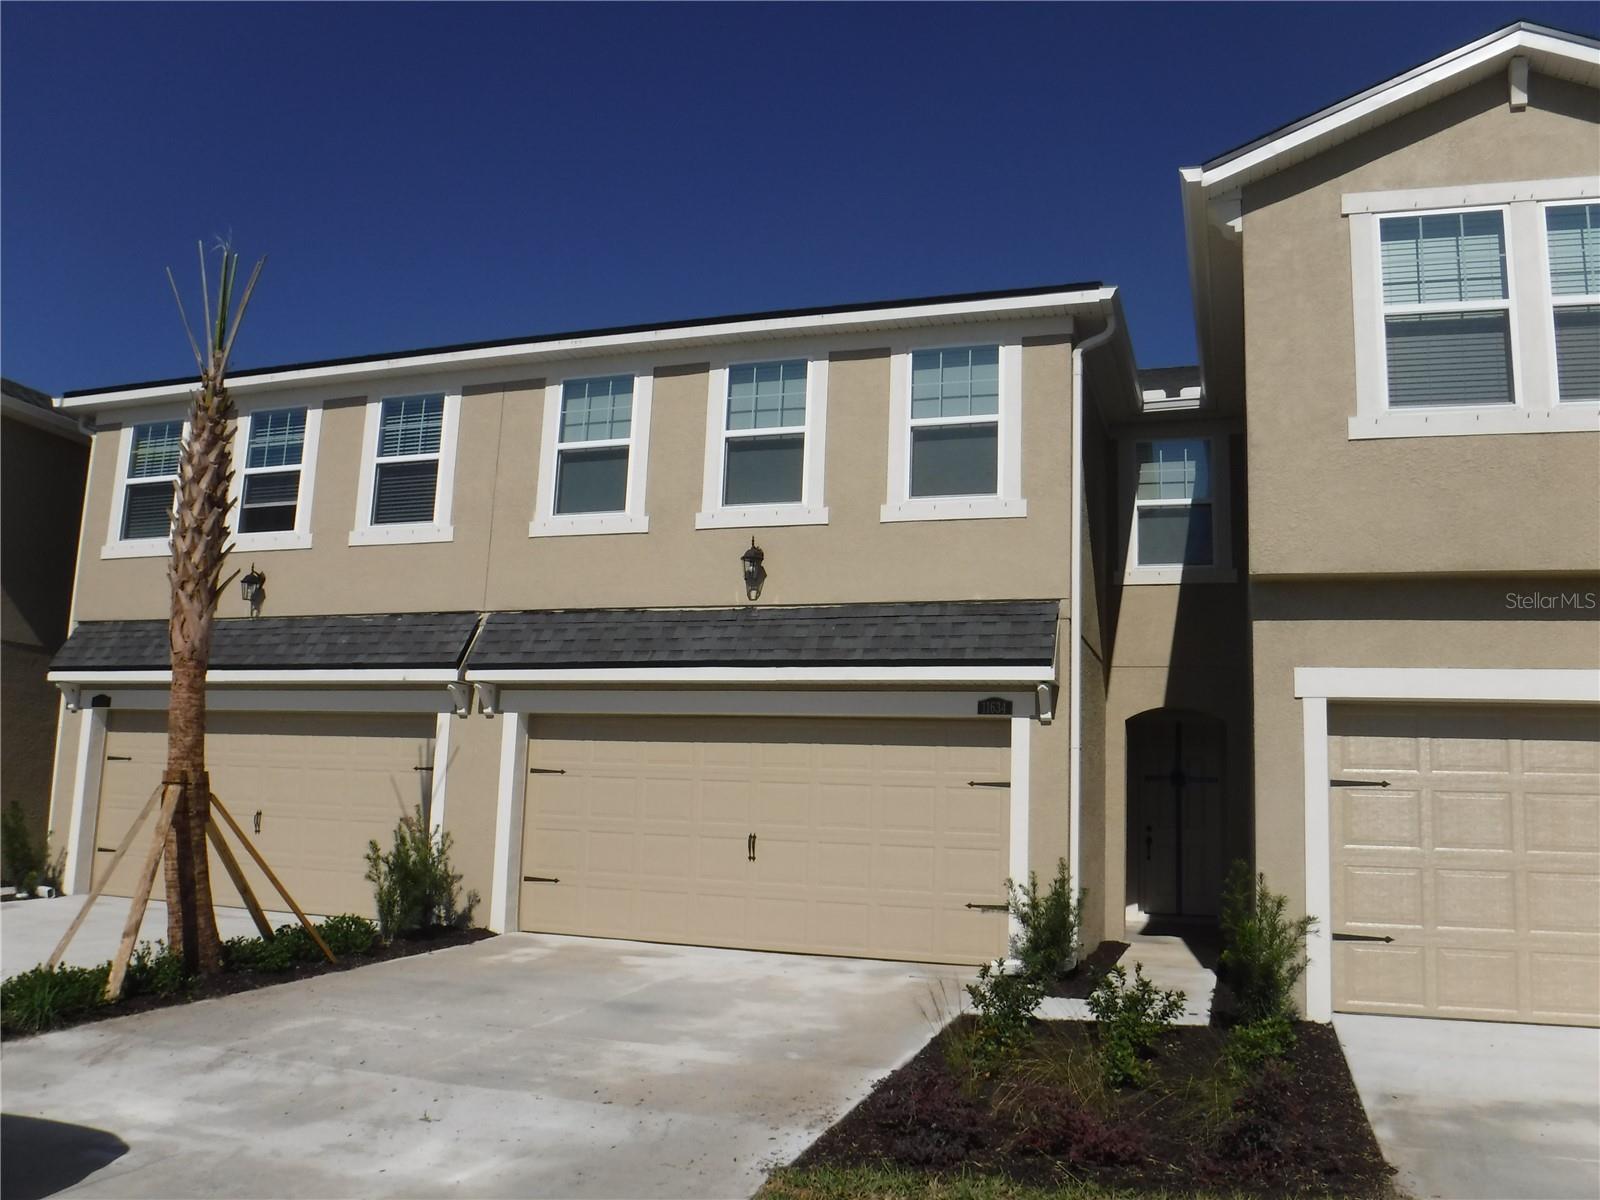 View RIVERVIEW, FL 33569 townhome